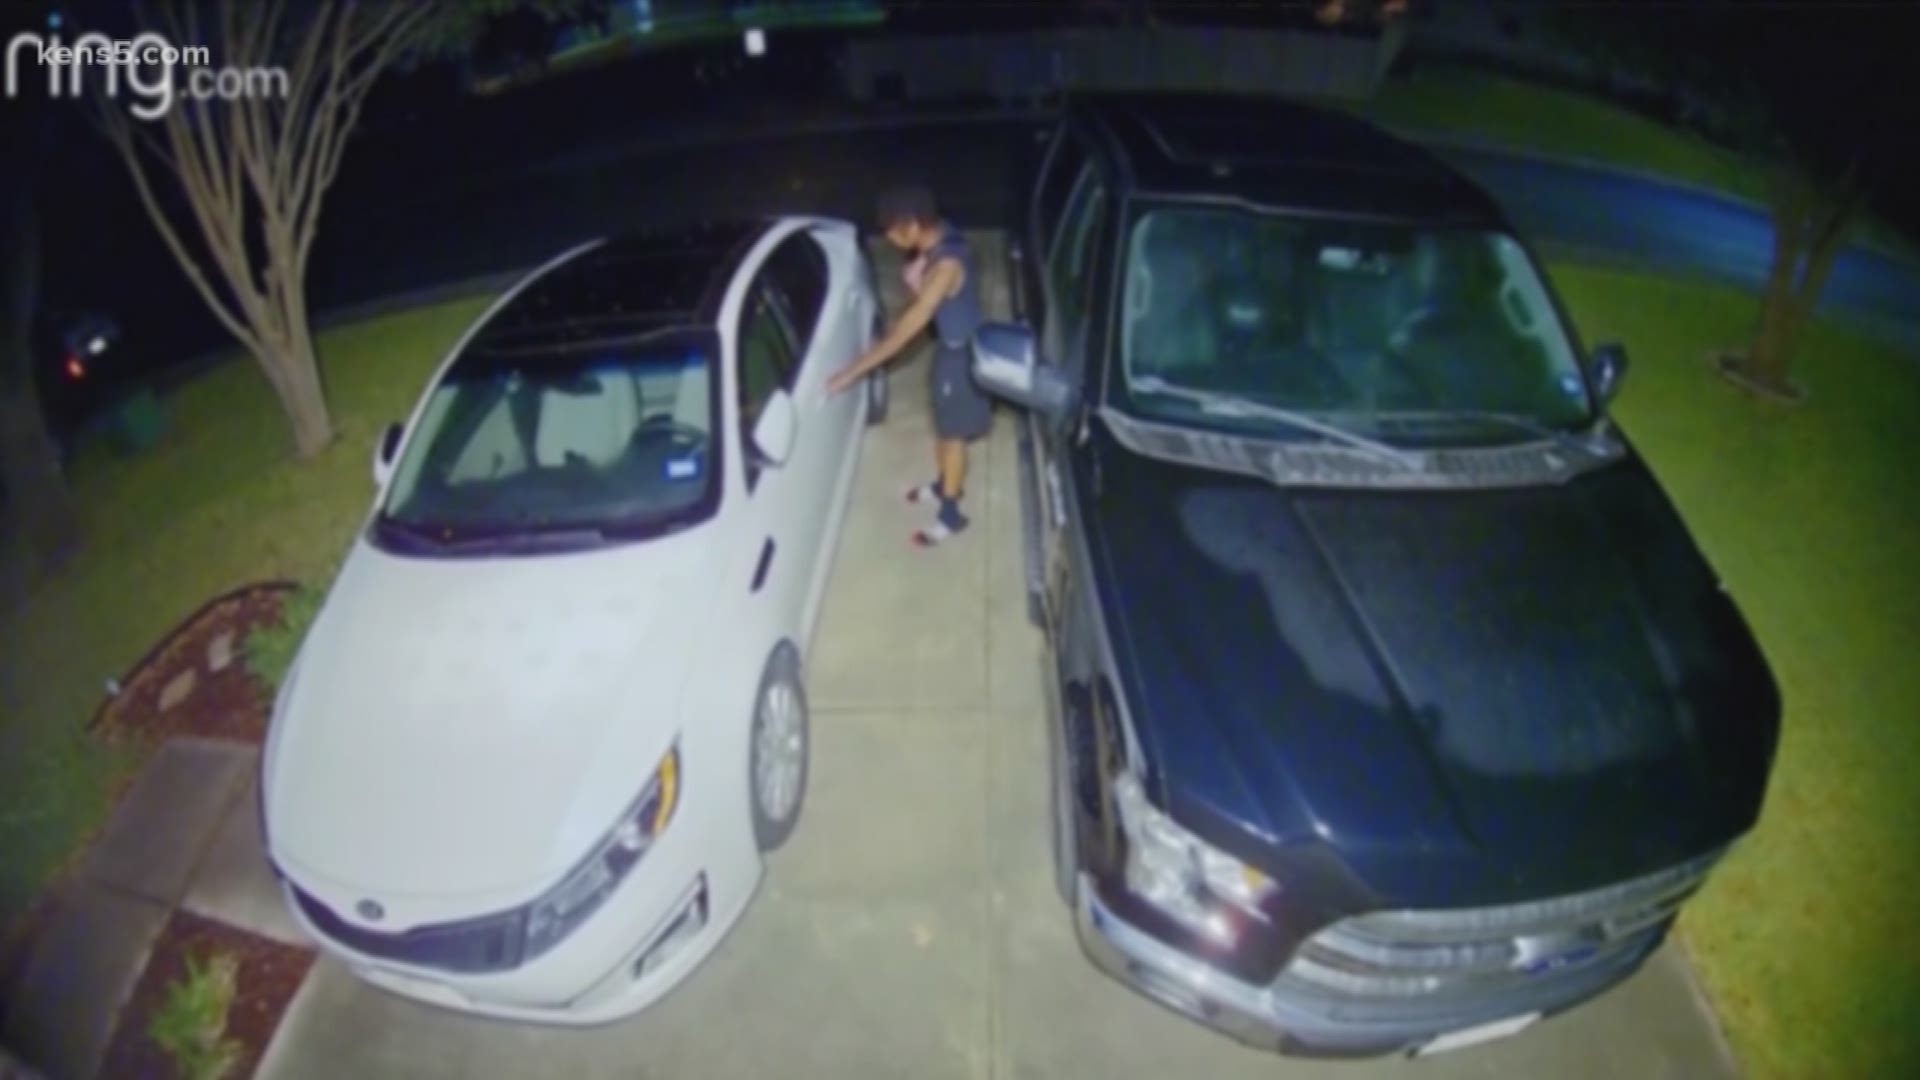 Surveillance videos in the Magnolia Heights neighborhood show a suspect lurking with a weapon, trying to break into cars.